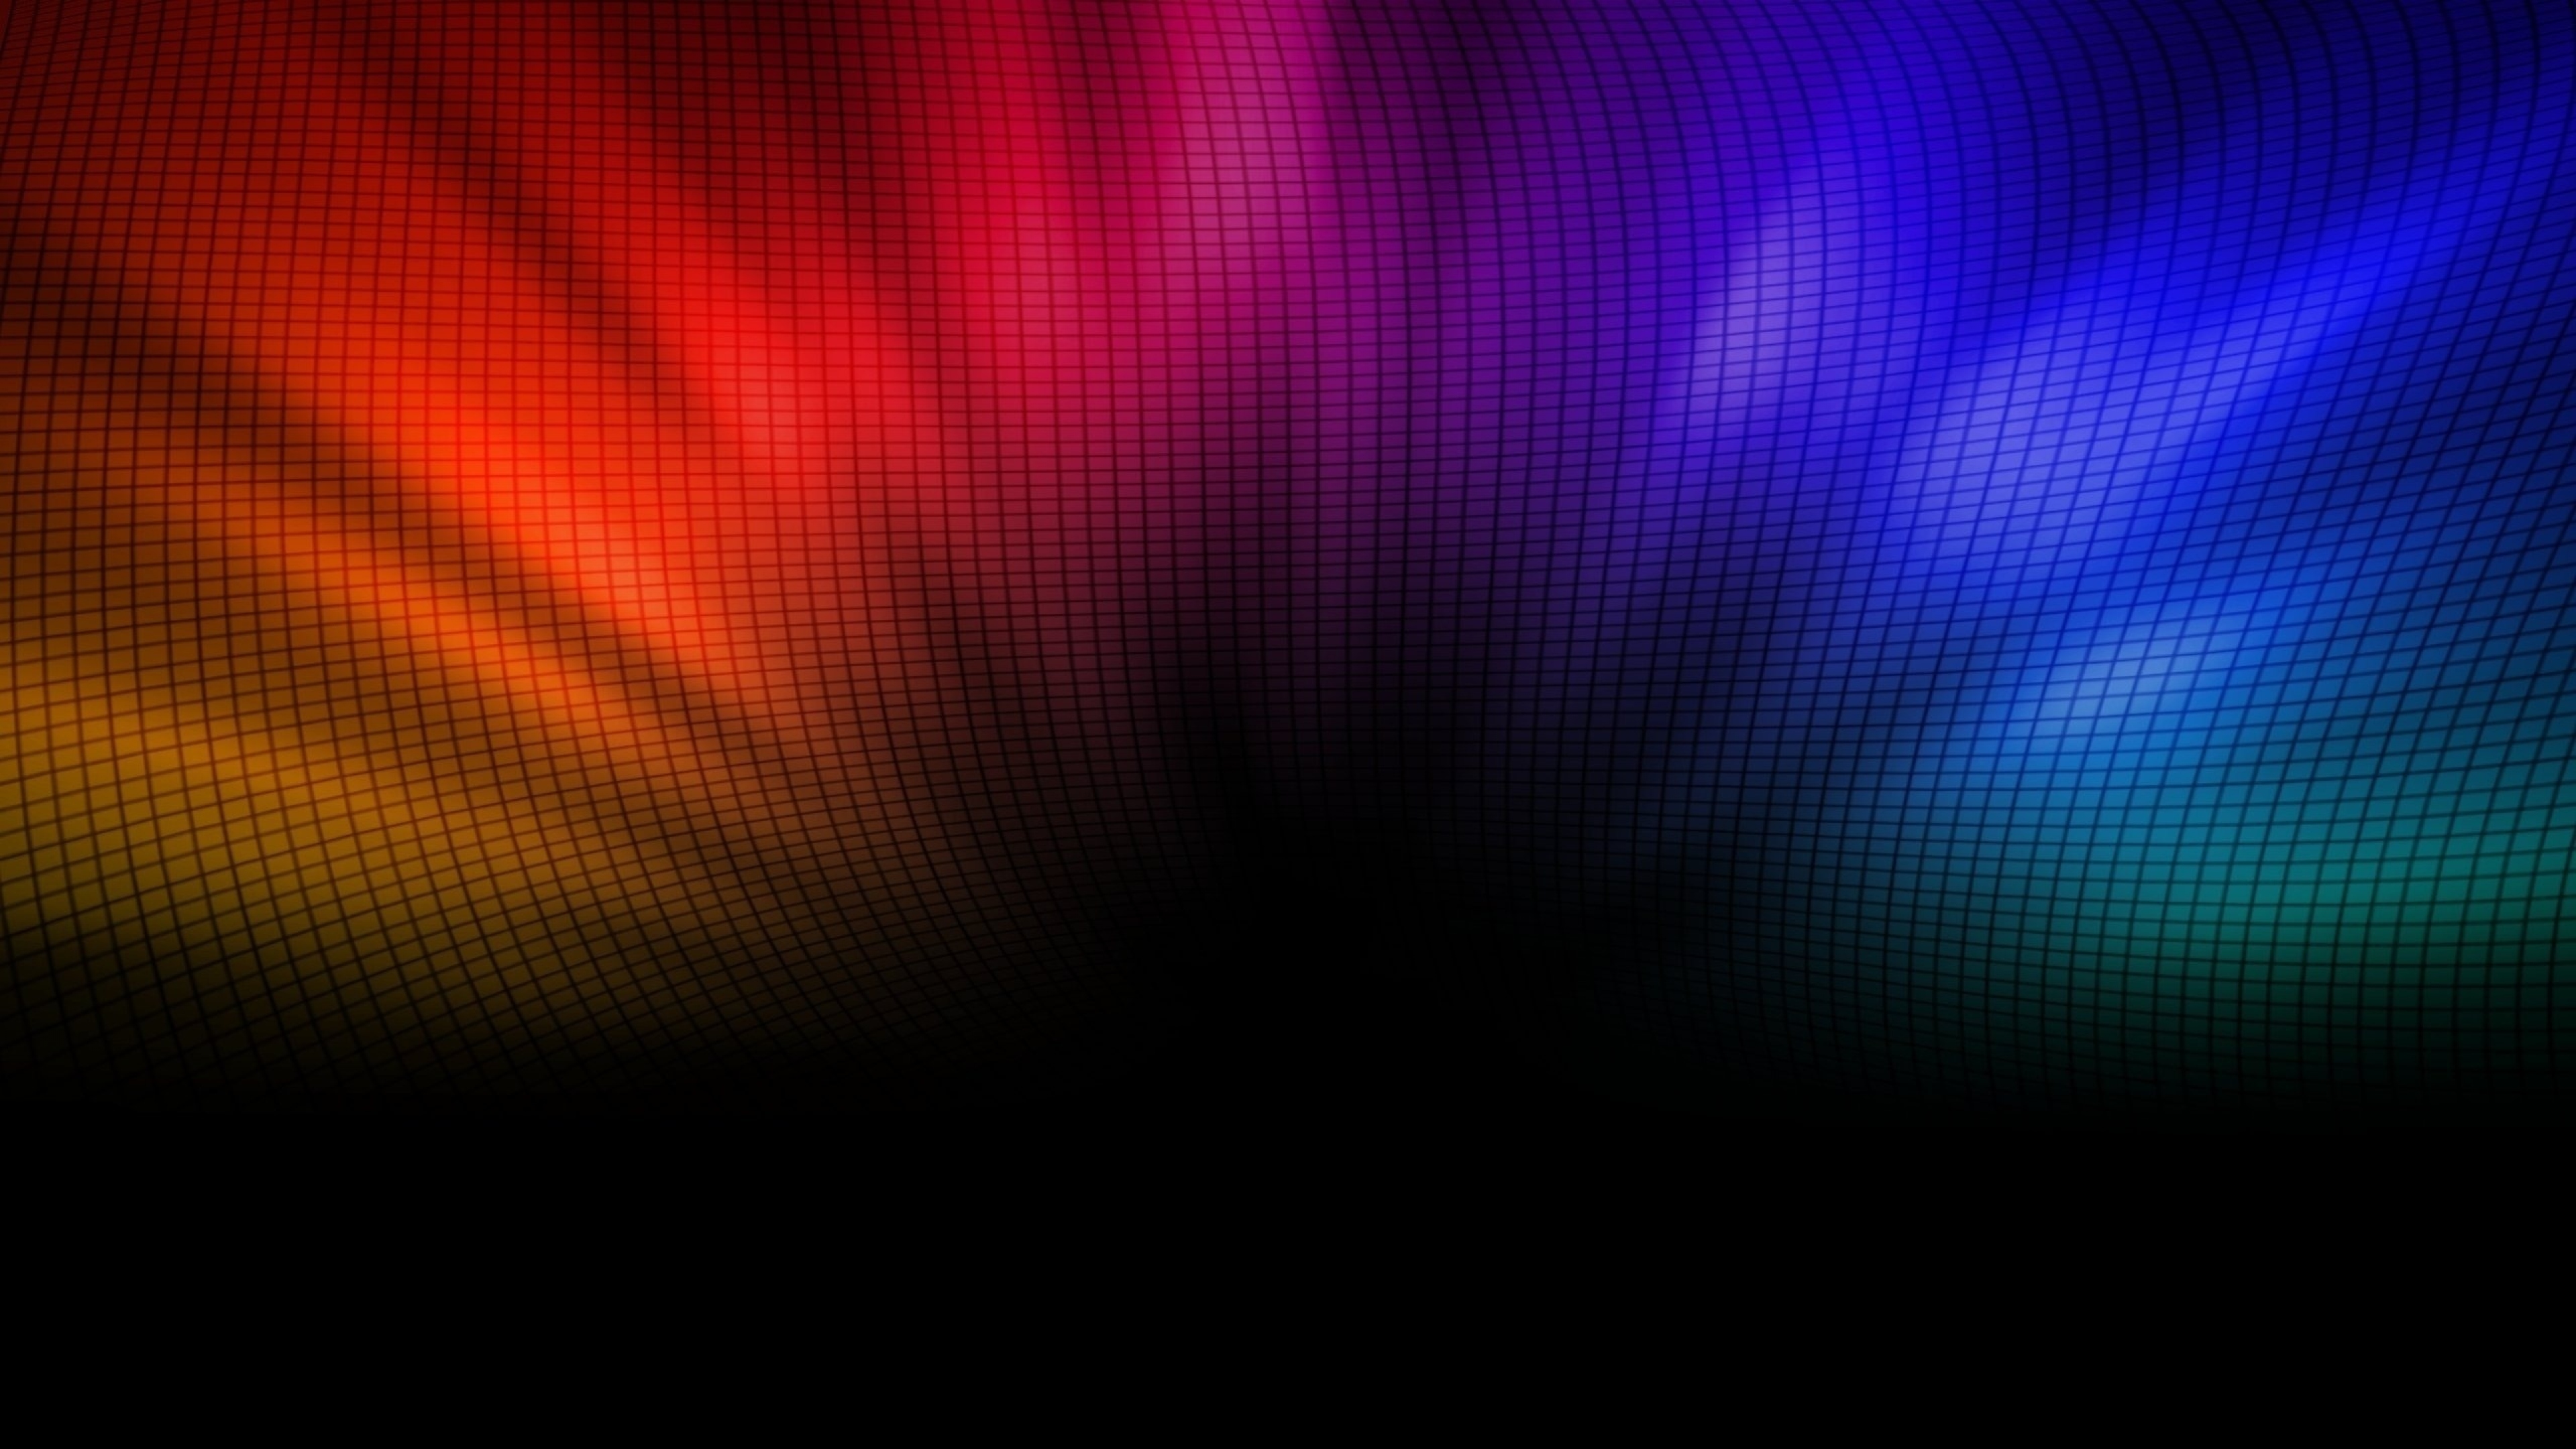 Colorful Wallpaper and Cool 1080p HD Desktop Backgrounds